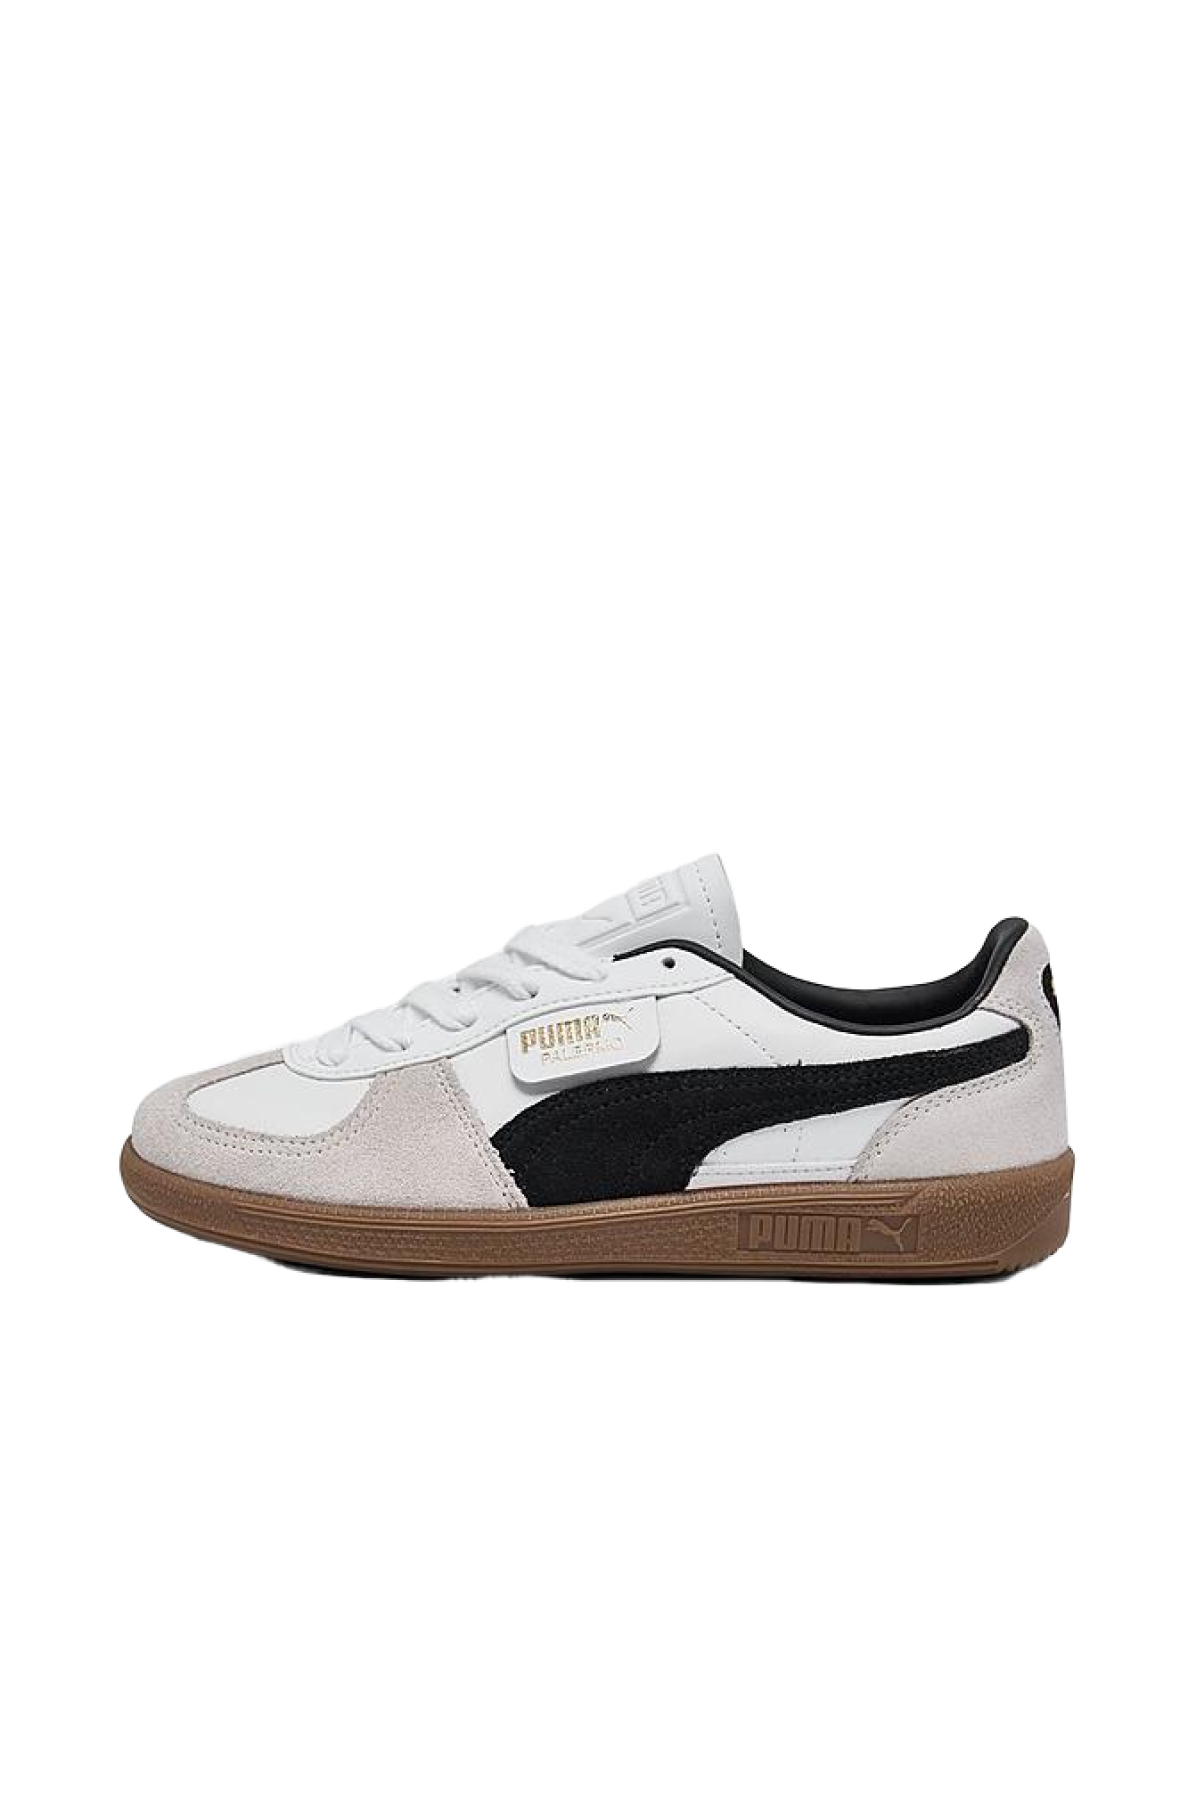 Puma Palermo Leather Casual Shoes